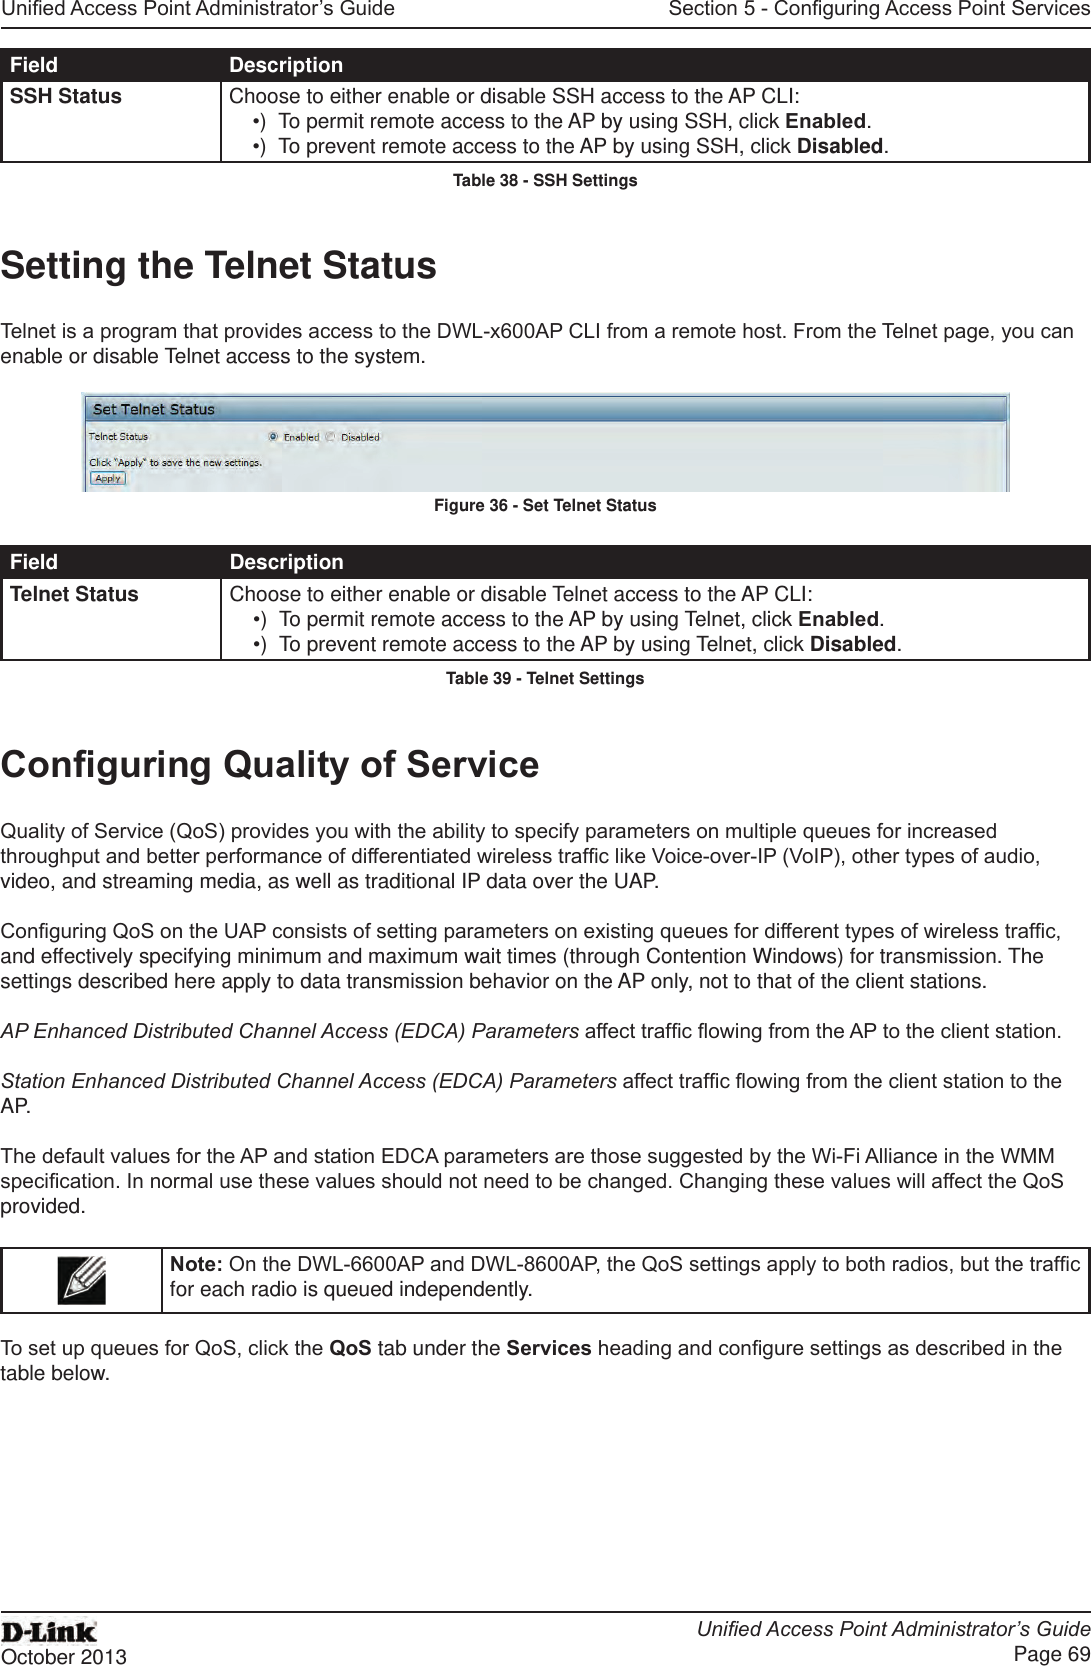 Unied Access Point Administrator’s GuideUnied Access Point Administrator’s GuidePage 69October 2013Section 5 - Conguring Access Point ServicesField DescriptionSSH Status Choose to either enable or disable SSH access to the AP CLI:•)  To permit remote access to the AP by using SSH, click Enabled.•)  To prevent remote access to the AP by using SSH, click Disabled.Table 38 - SSH SettingsSetting the Telnet StatusTelnet is a program that provides access to the DWL-x600AP CLI from a remote host. From the Telnet page, you can enable or disable Telnet access to the system. Figure 36 - Set Telnet StatusField DescriptionTelnet Status Choose to either enable or disable Telnet access to the AP CLI:•)  To permit remote access to the AP by using Telnet, click Enabled.•)  To prevent remote access to the AP by using Telnet, click Disabled.Table 39 - Telnet SettingsConguring Quality of ServiceQuality of Service (QoS) provides you with the ability to specify parameters on multiple queues for increased throughput and better performance of differentiated wireless trafc like Voice-over-IP (VoIP), other types of audio, video, and streaming media, as well as traditional IP data over the UAP.Conguring QoS on the UAP consists of setting parameters on existing queues for different types of wireless trafc, and effectively specifying minimum and maximum wait times (through Contention Windows) for transmission. The settings described here apply to data transmission behavior on the AP only, not to that of the client stations.AP Enhanced Distributed Channel Access (EDCA) Parameters affect trafc owing from the AP to the client station.Station Enhanced Distributed Channel Access (EDCA) Parameters affect trafc owing from the client station to the AP.The default values for the AP and station EDCA parameters are those suggested by the Wi-Fi Alliance in the WMM specication. In normal use these values should not need to be changed. Changing these values will affect the QoS provided.Note: On the DWL-6600AP and DWL-8600AP, the QoS settings apply to both radios, but the trafc for each radio is queued independently. To set up queues for QoS, click the QoS tab under the Services heading and congure settings as described in the table below.